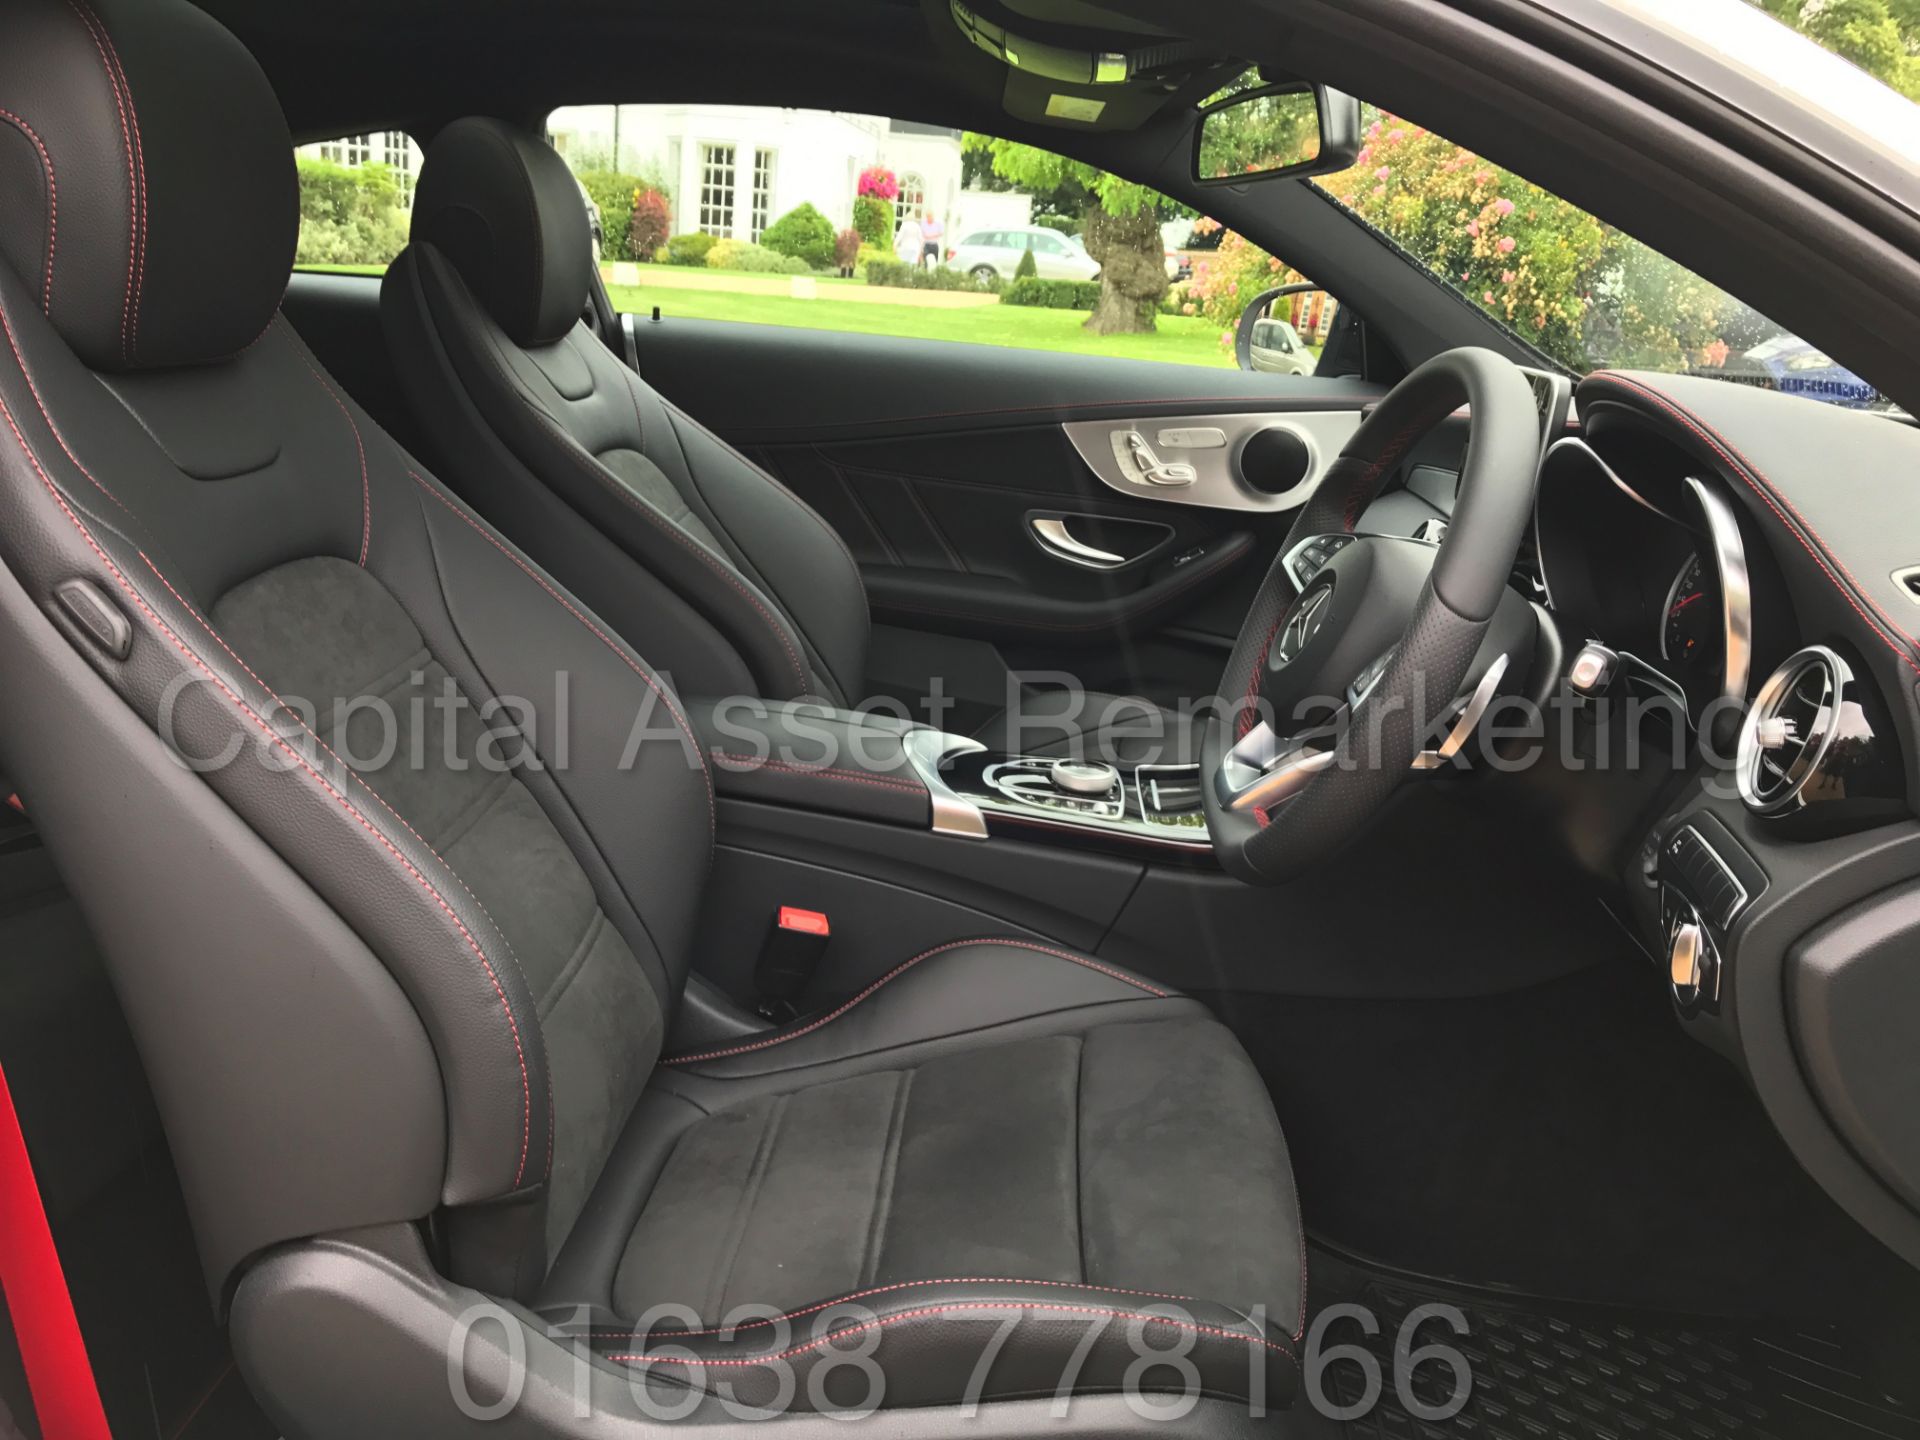 MEREDES-BENZ C43 AMG PREMIUM '4 MATIC' COUPE (2017) '9-G AUTO - LEATHER - SAT NAV' **FULLY LOADED** - Image 37 of 57